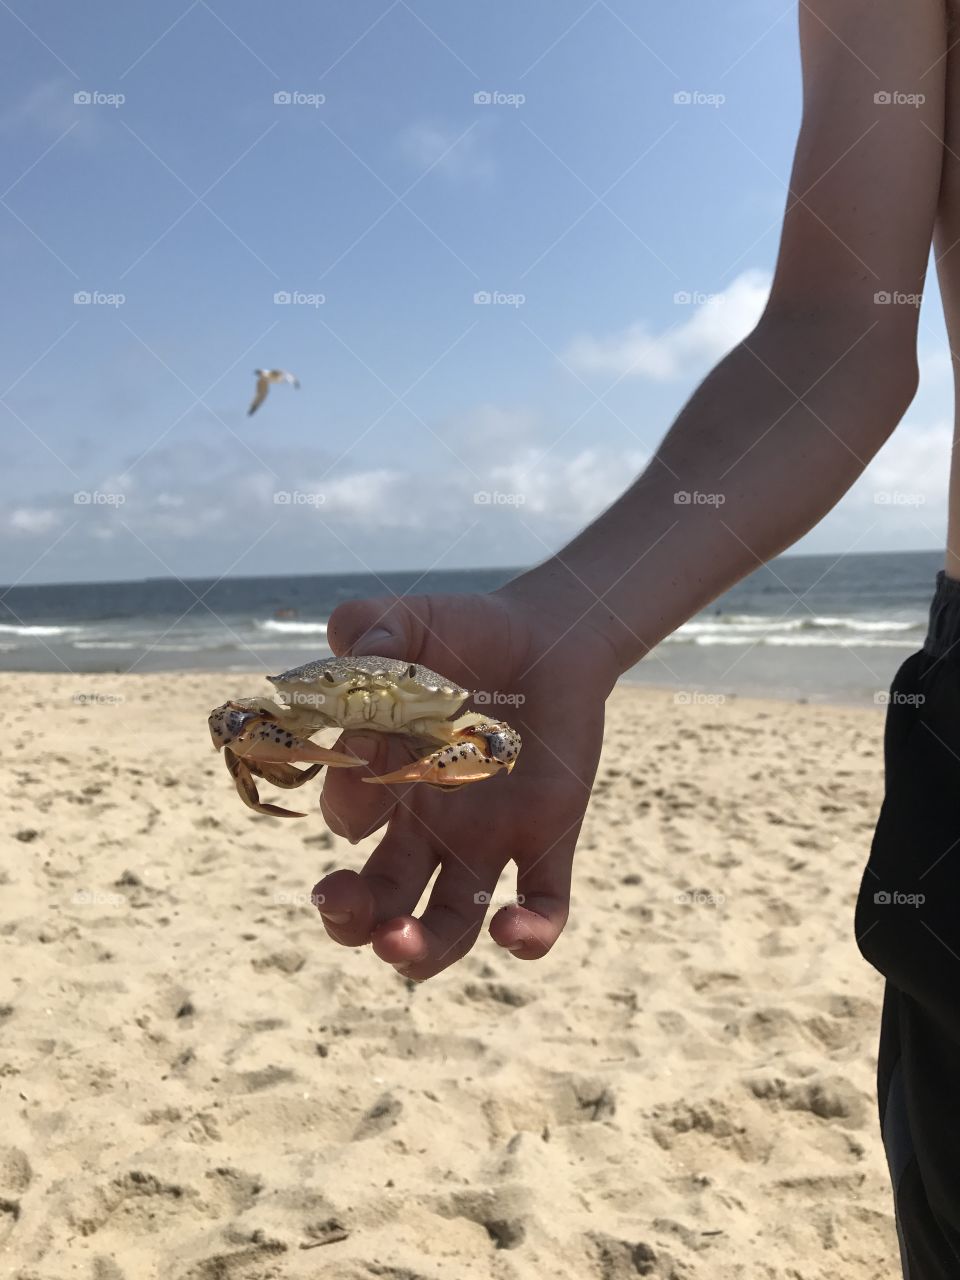 Cute crab at the New Jersey Shore